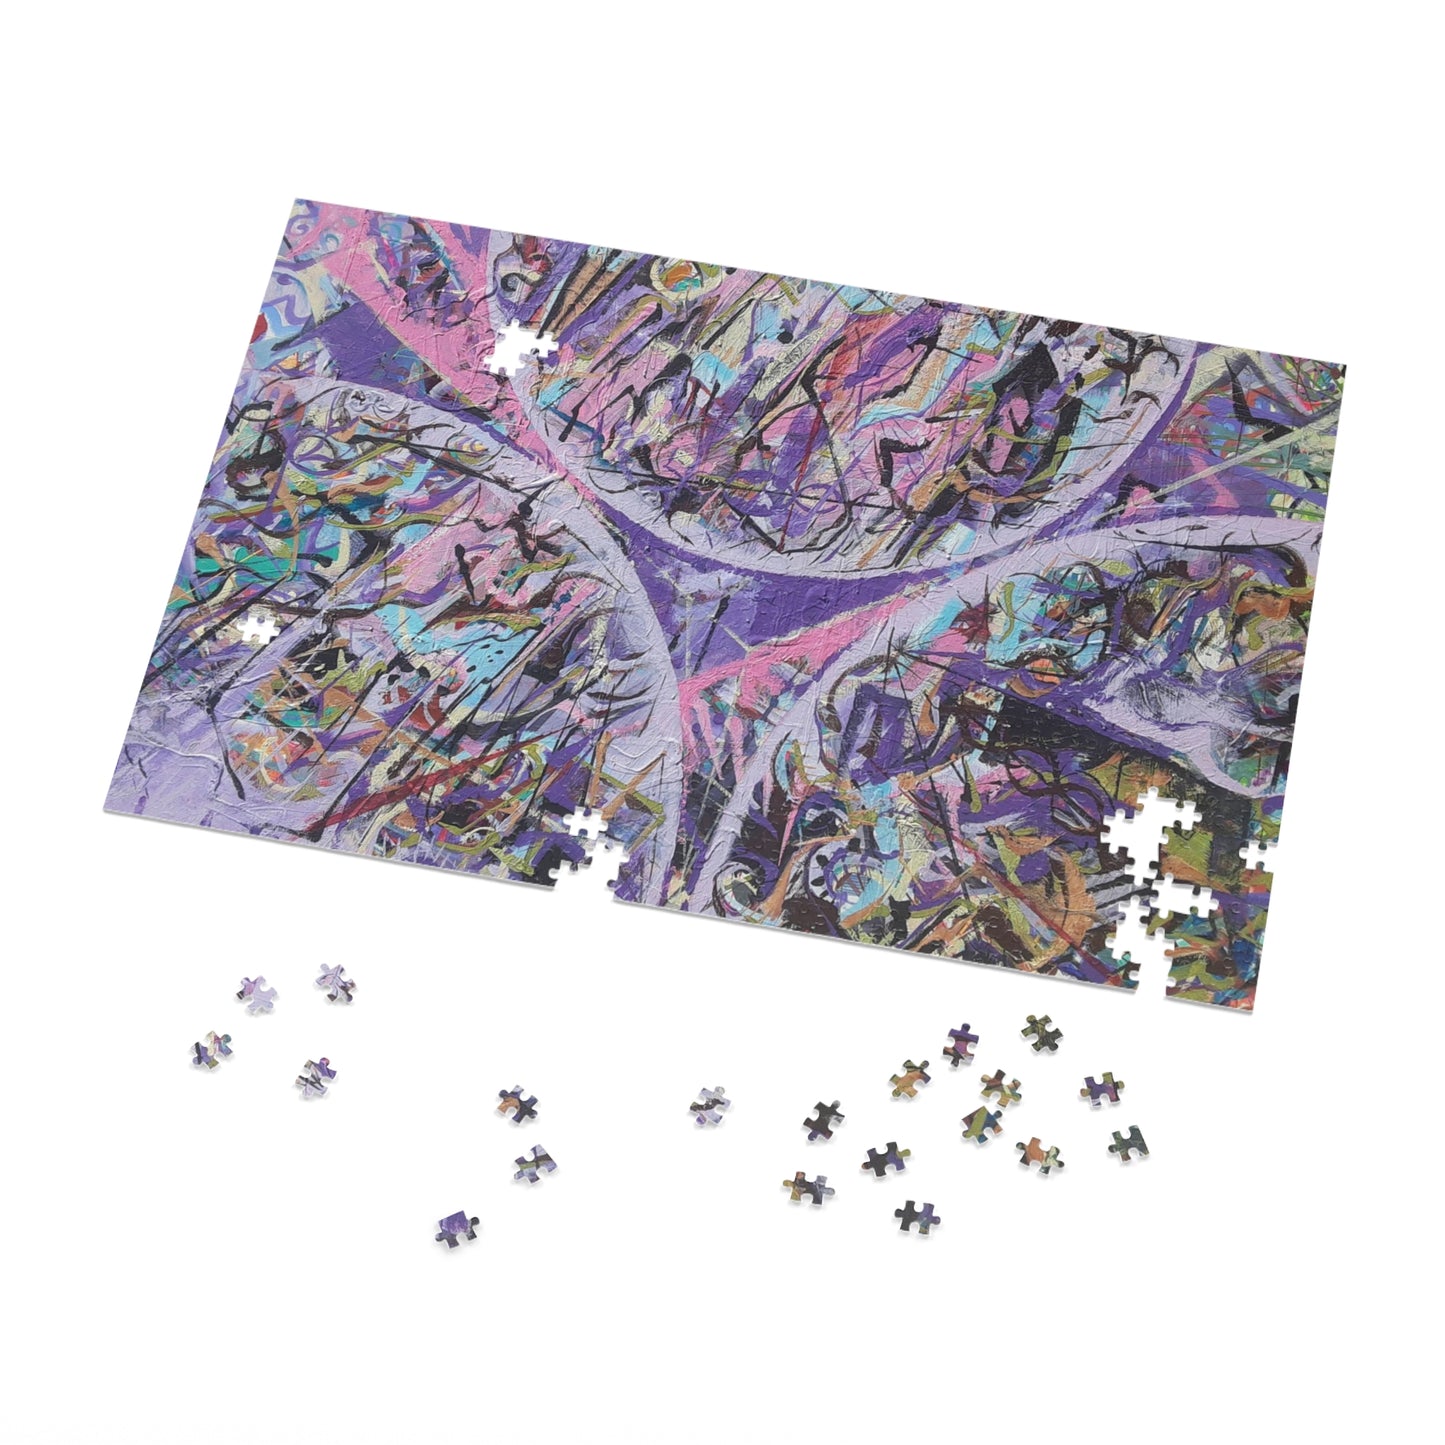 Jigsaw Puzzle - Chaotic Convergence